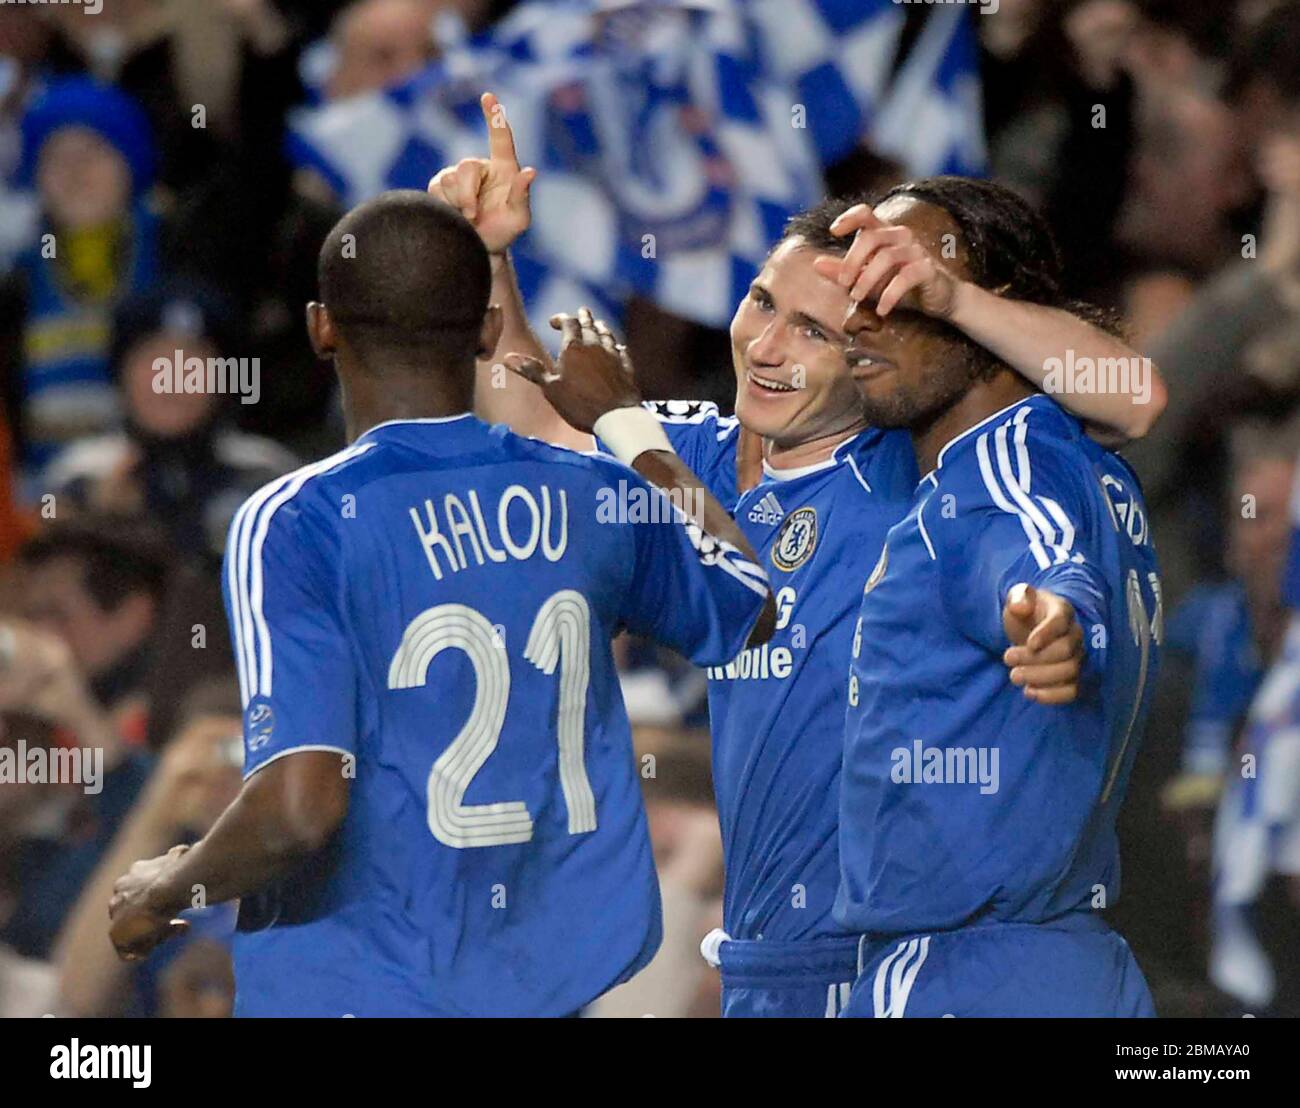 LONDON, UK. MARCH 05: Frank Lampard centre) celebrates scoring the second goal. Salomon Kalou (Chelsea, 21) and Didier Drgba join in during Stock Photo - Alamy